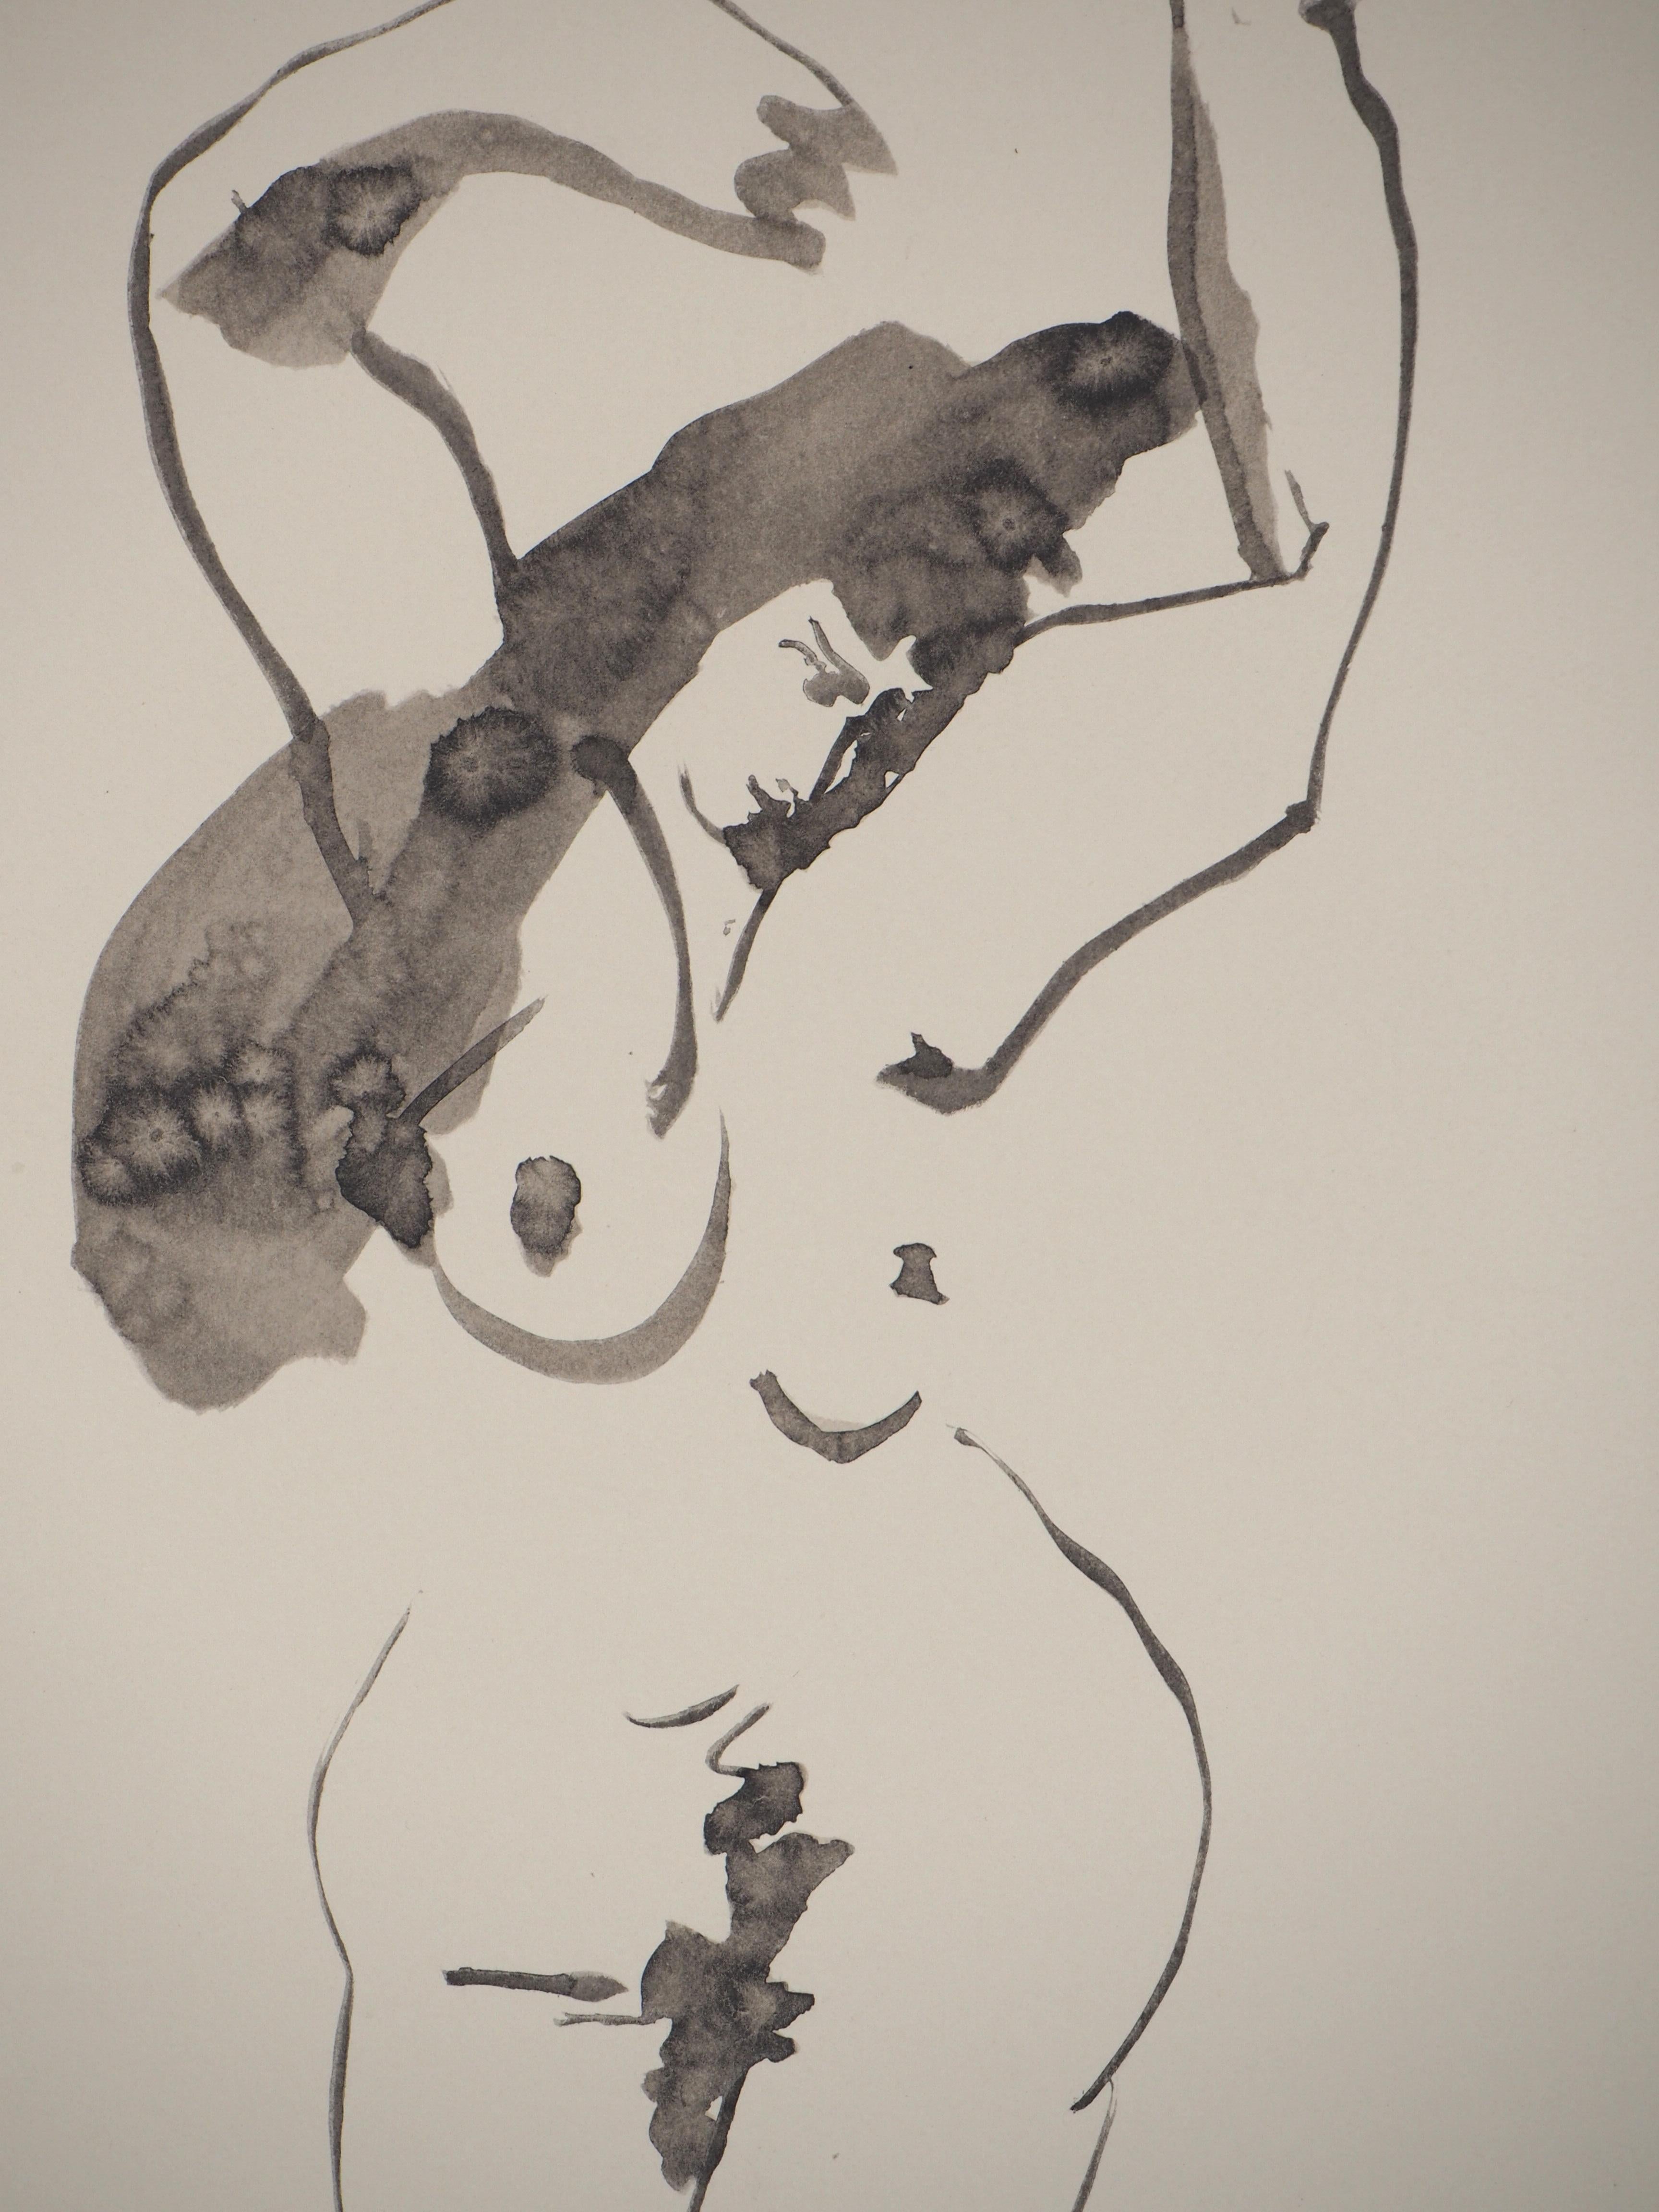 Toros : The Spanish Dancer - Lithograph, Limited 500 copies, 1960 - Beige Figurative Print by (after) Pablo Picasso